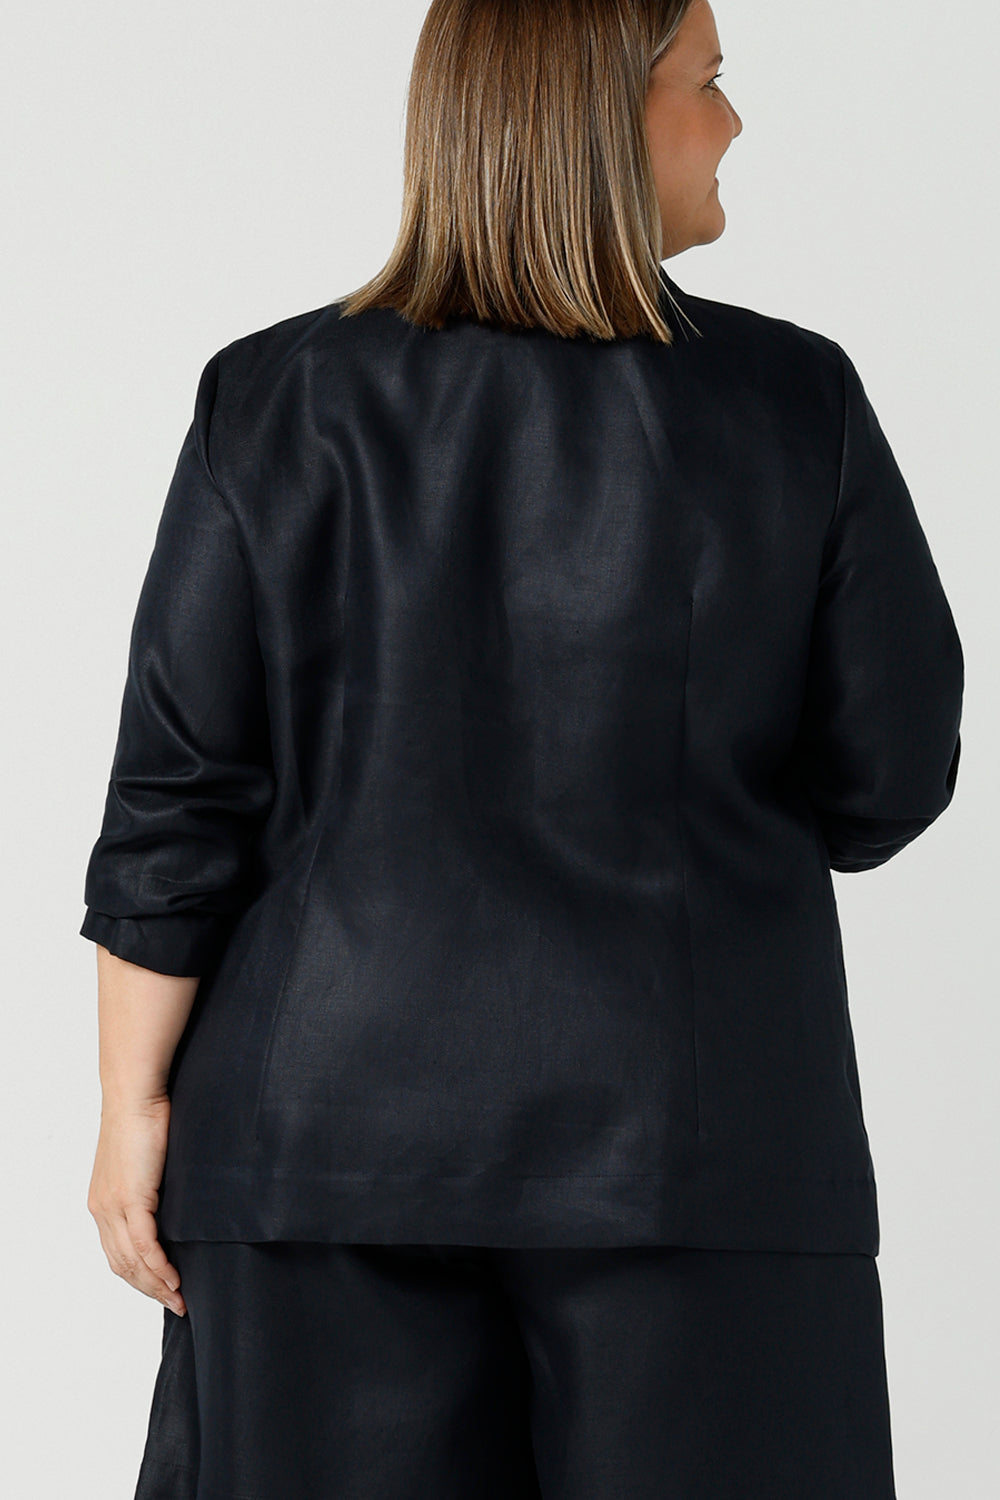 Back view of a size 18 woman wearing a 100% linen blazer jacket with a tailored design. Breathable linen fabric. This blazer has a relaxed fit a button front construction. A transeasonal linen work jacket, in a luxe midnight navy colour. Australian-made using sustainable 100% linen fabric. Size-inclusive fashion 8-24 for corporate casual workwear.